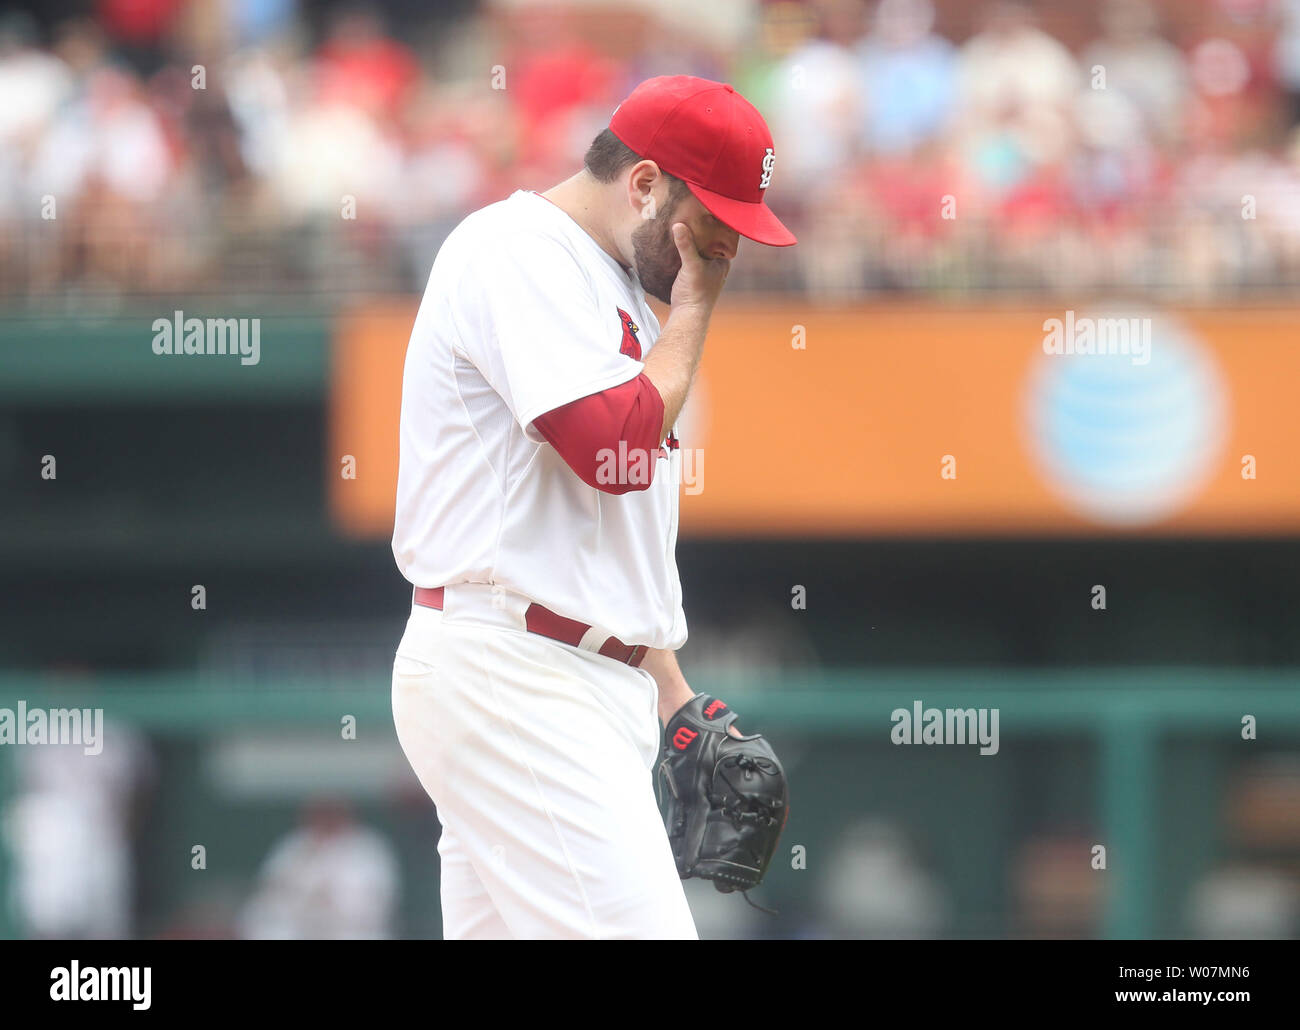 St. Louis Cardinals starting pitcher Lance Lynn wipes his face as he leaves the game in the third inning againt the Chicago Cubs at Busch Stadium in St. Louis on September 7, 2015. Lynn gave up  seven runs. Photo by Bill Greenblatt Stock Photo